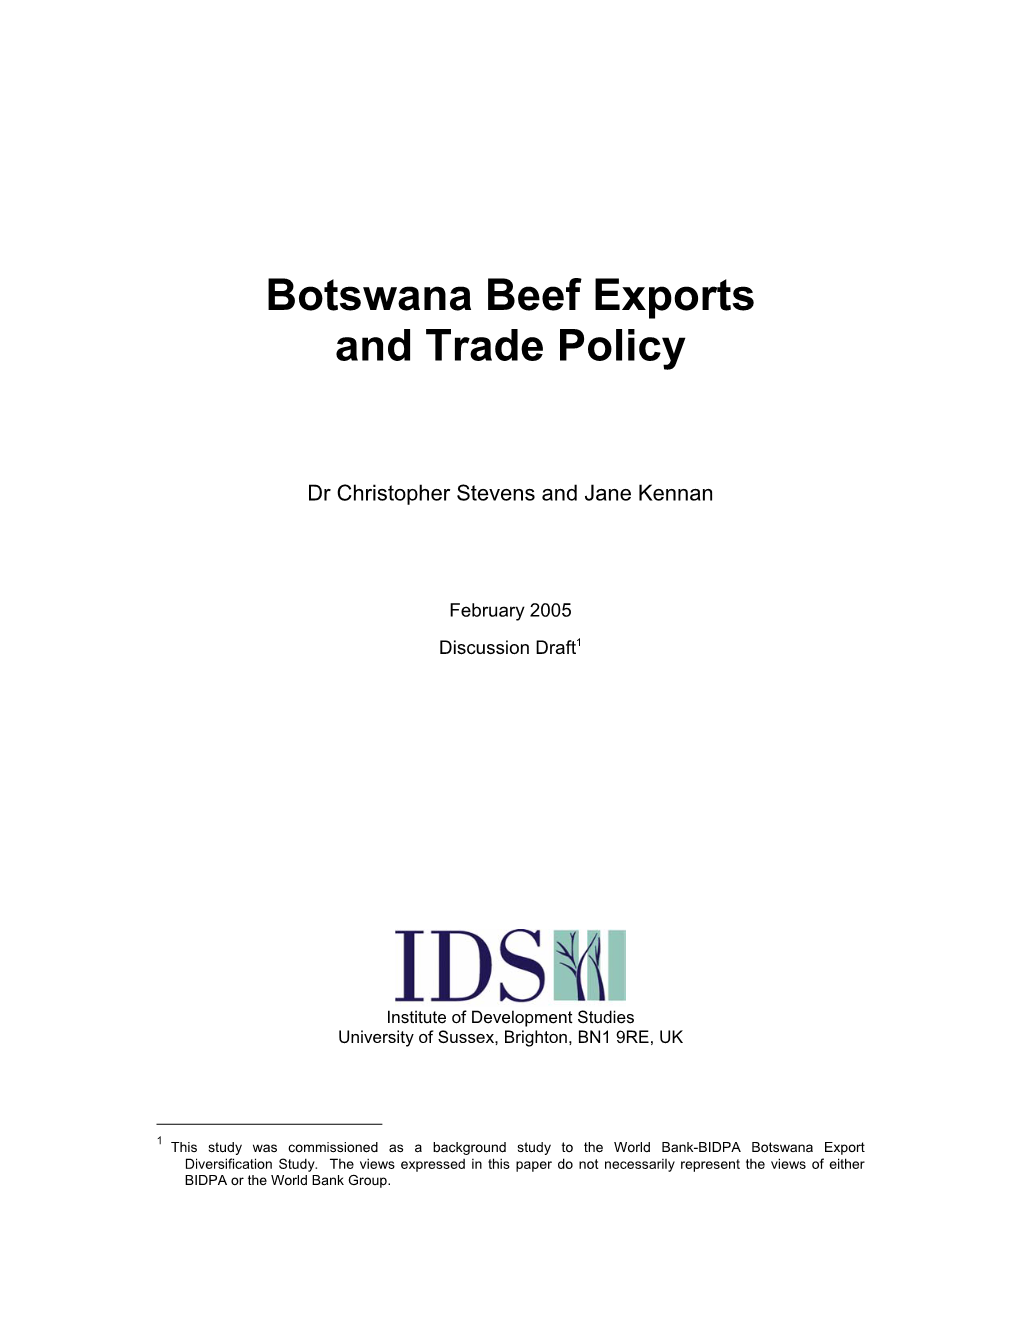 Botswana Beef Exports and Trade Policy